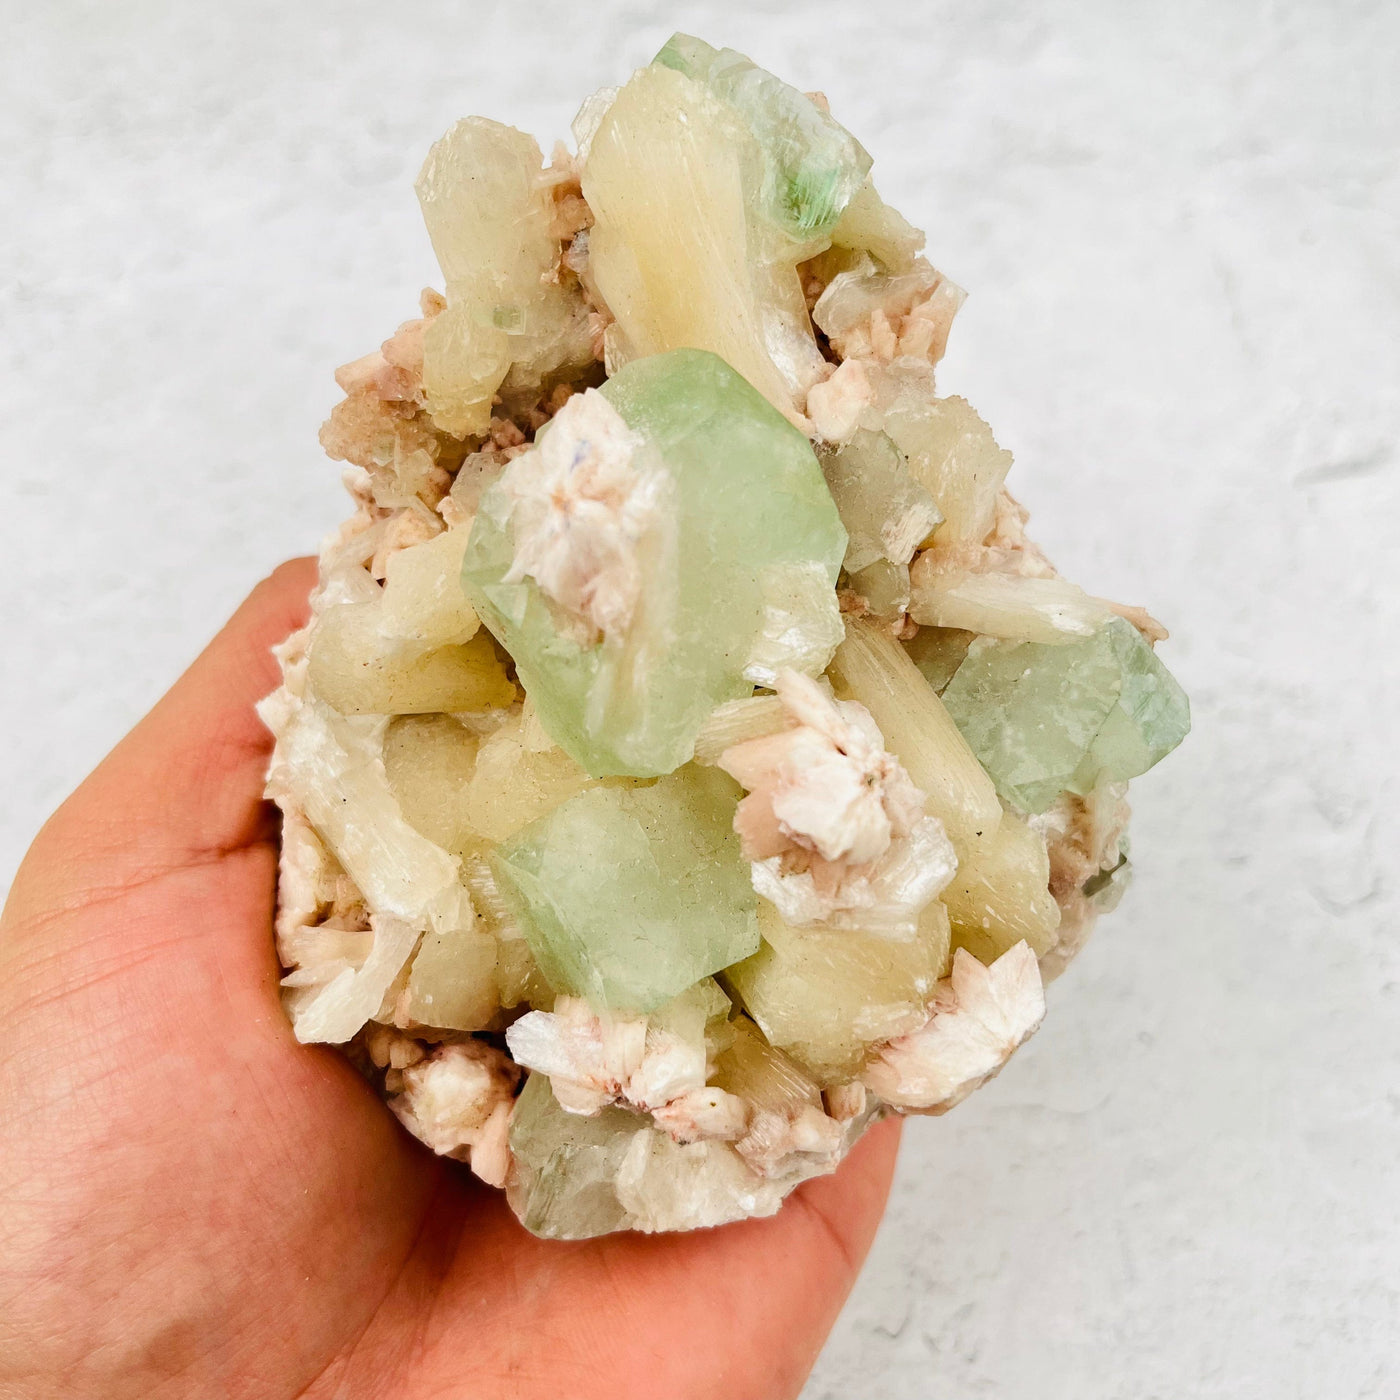 Green Apophyllite with Stilbite on Heulandite Zeolites - OOAK - With Hand For Sizing Reference